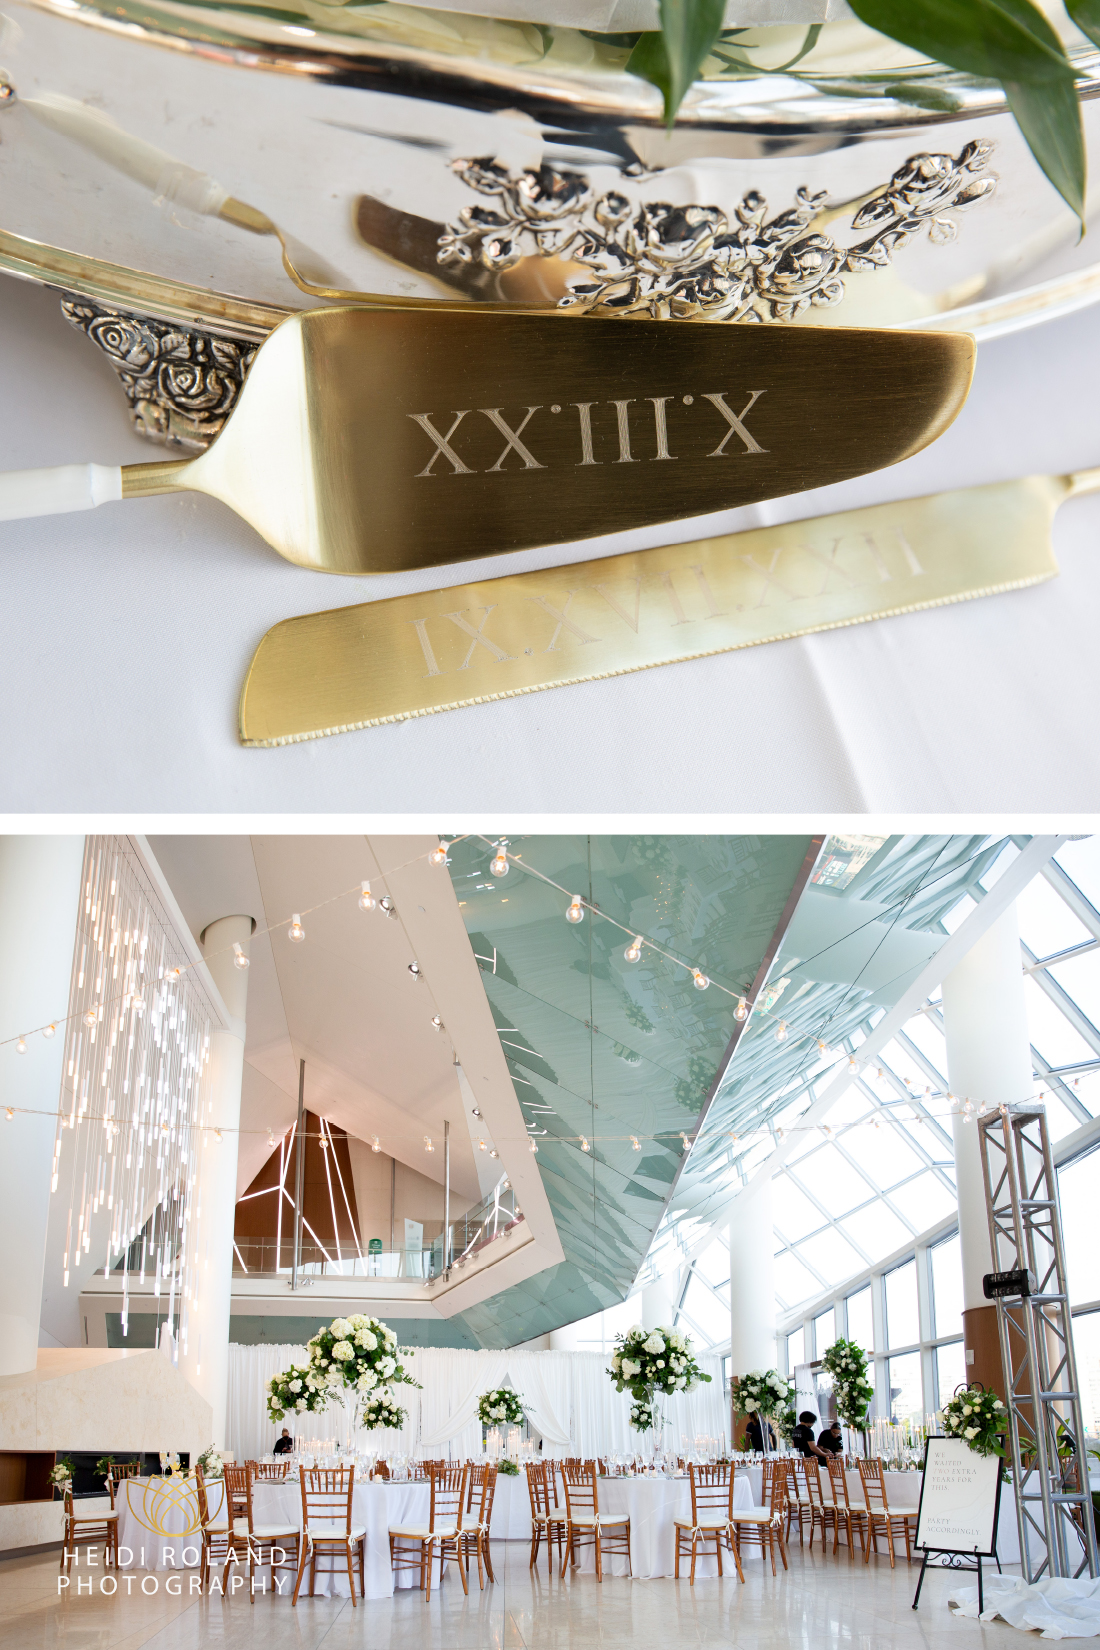 Custom cake cutting knives with wedding date and wedding reception setup at Cira Centre in Philadelphia